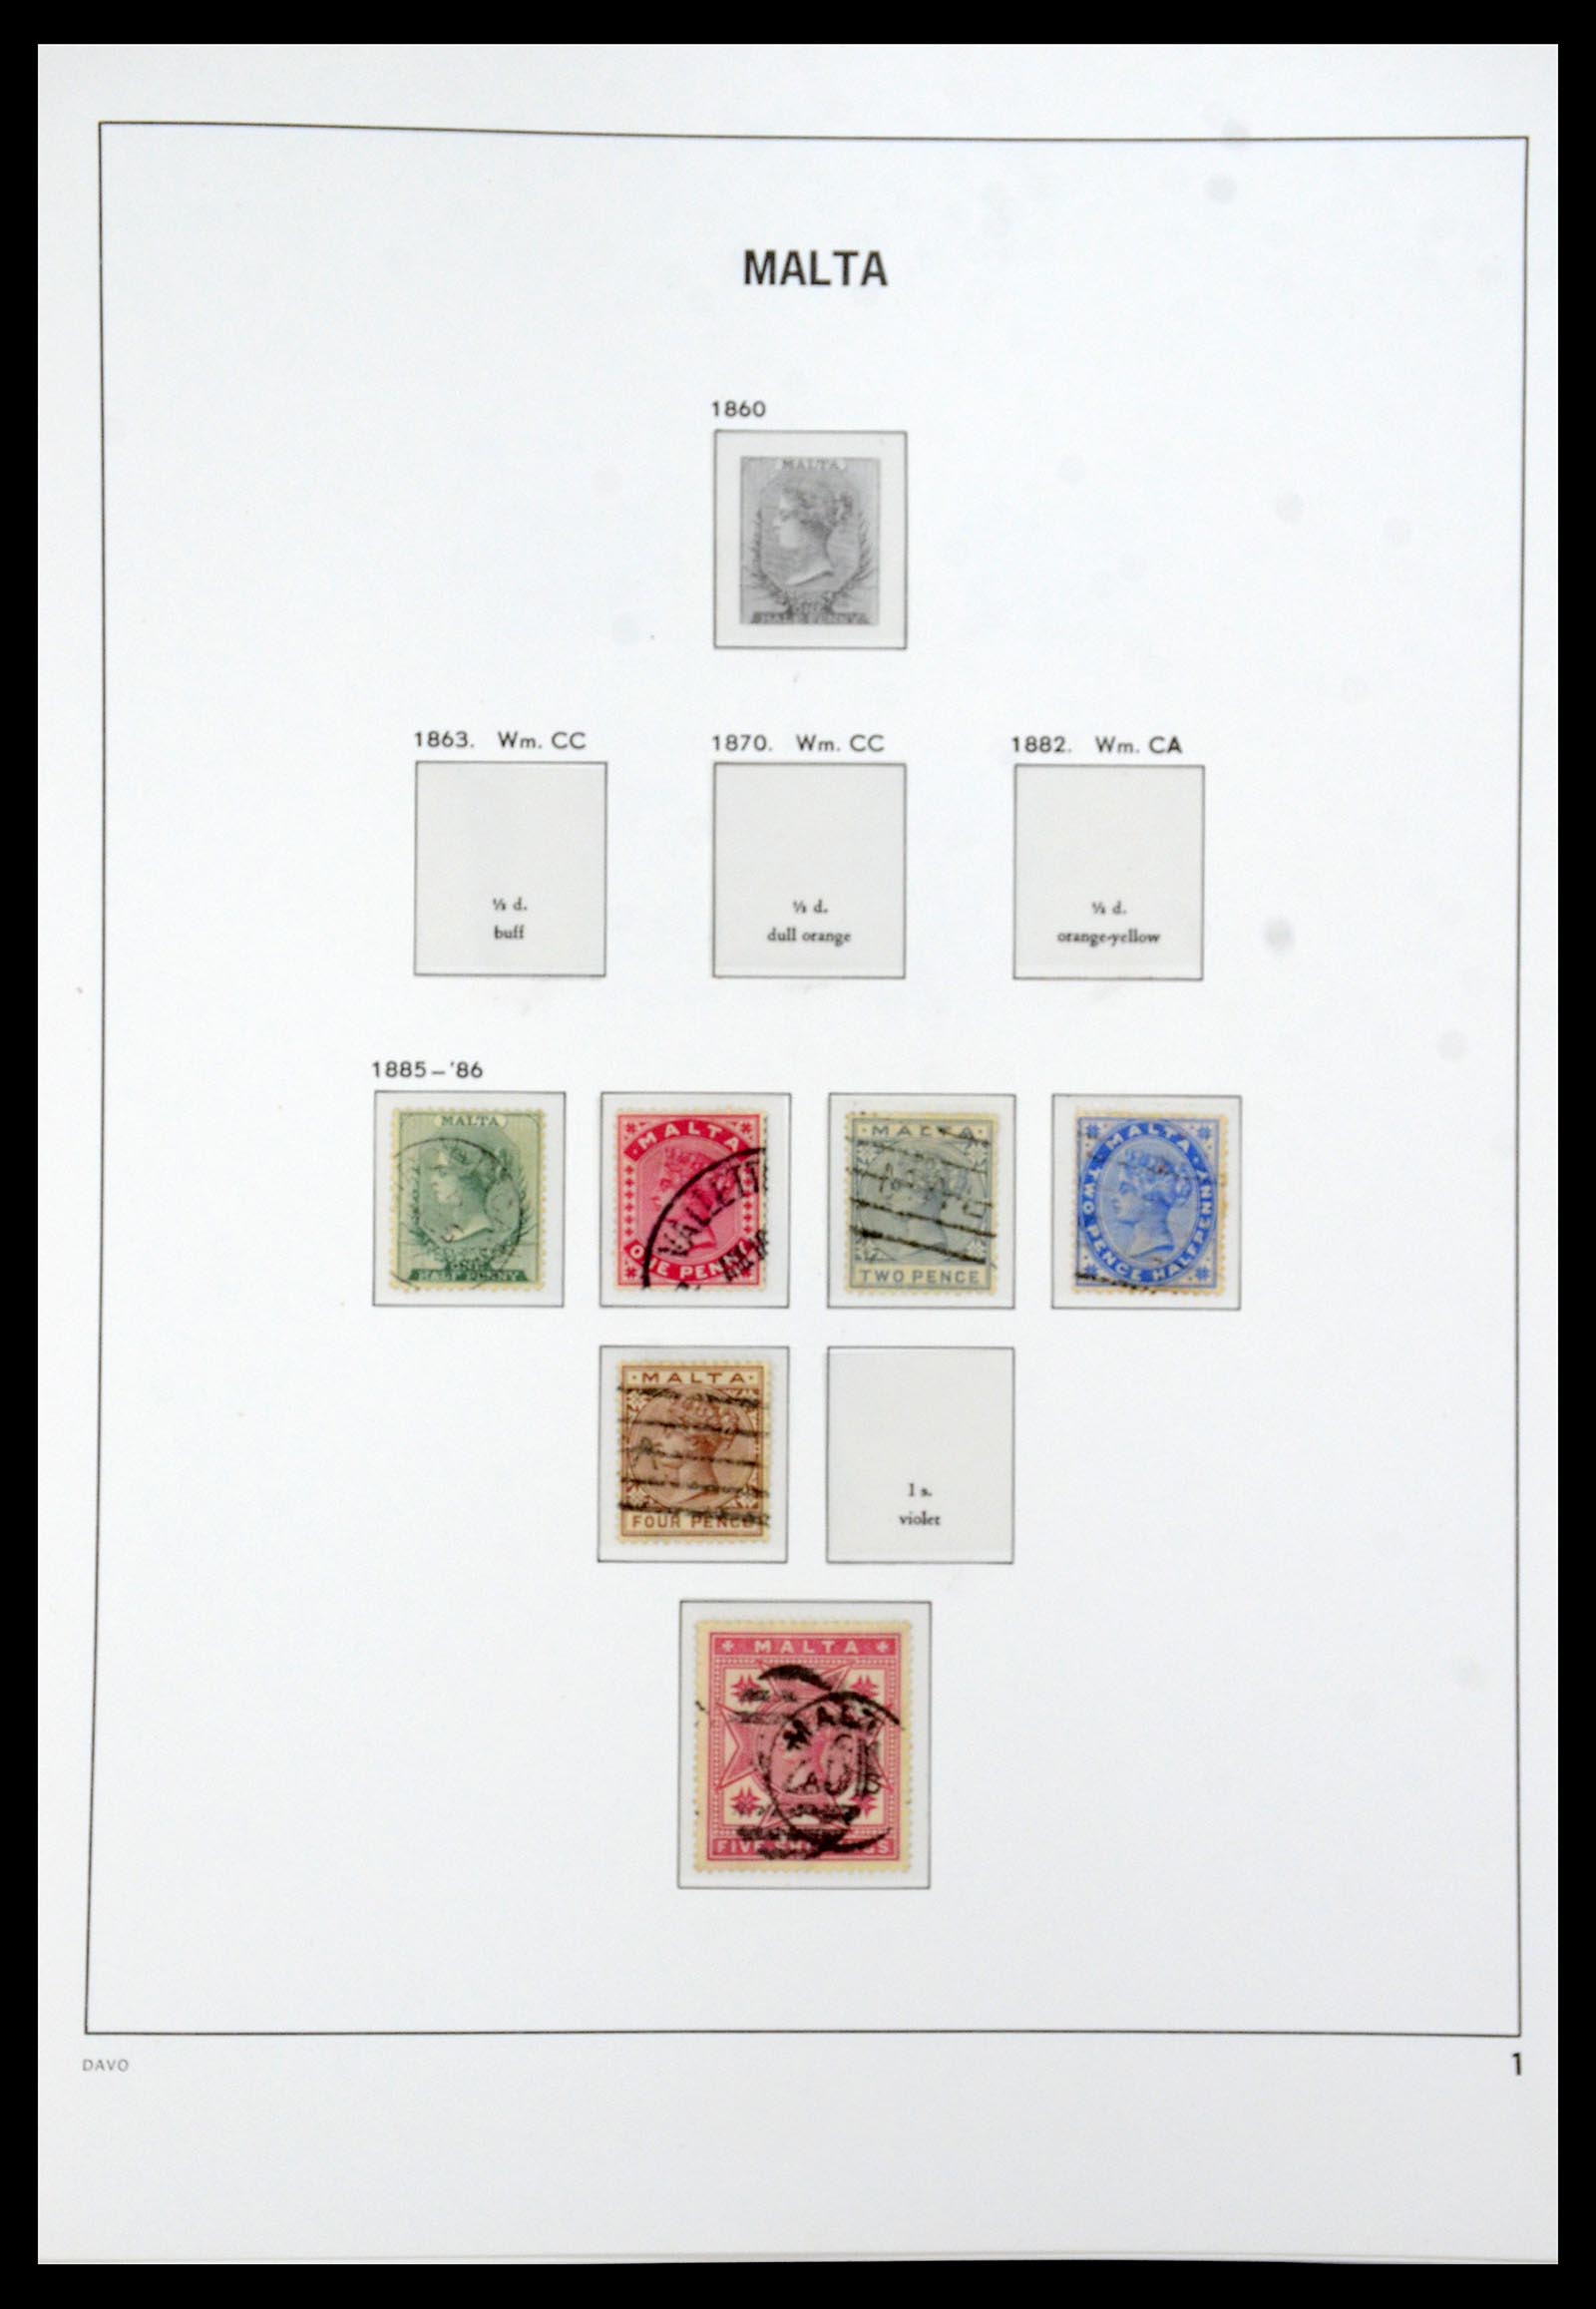 36233 010 - Stamp collection 36233 Gibraltar and Malta 1884-1964.